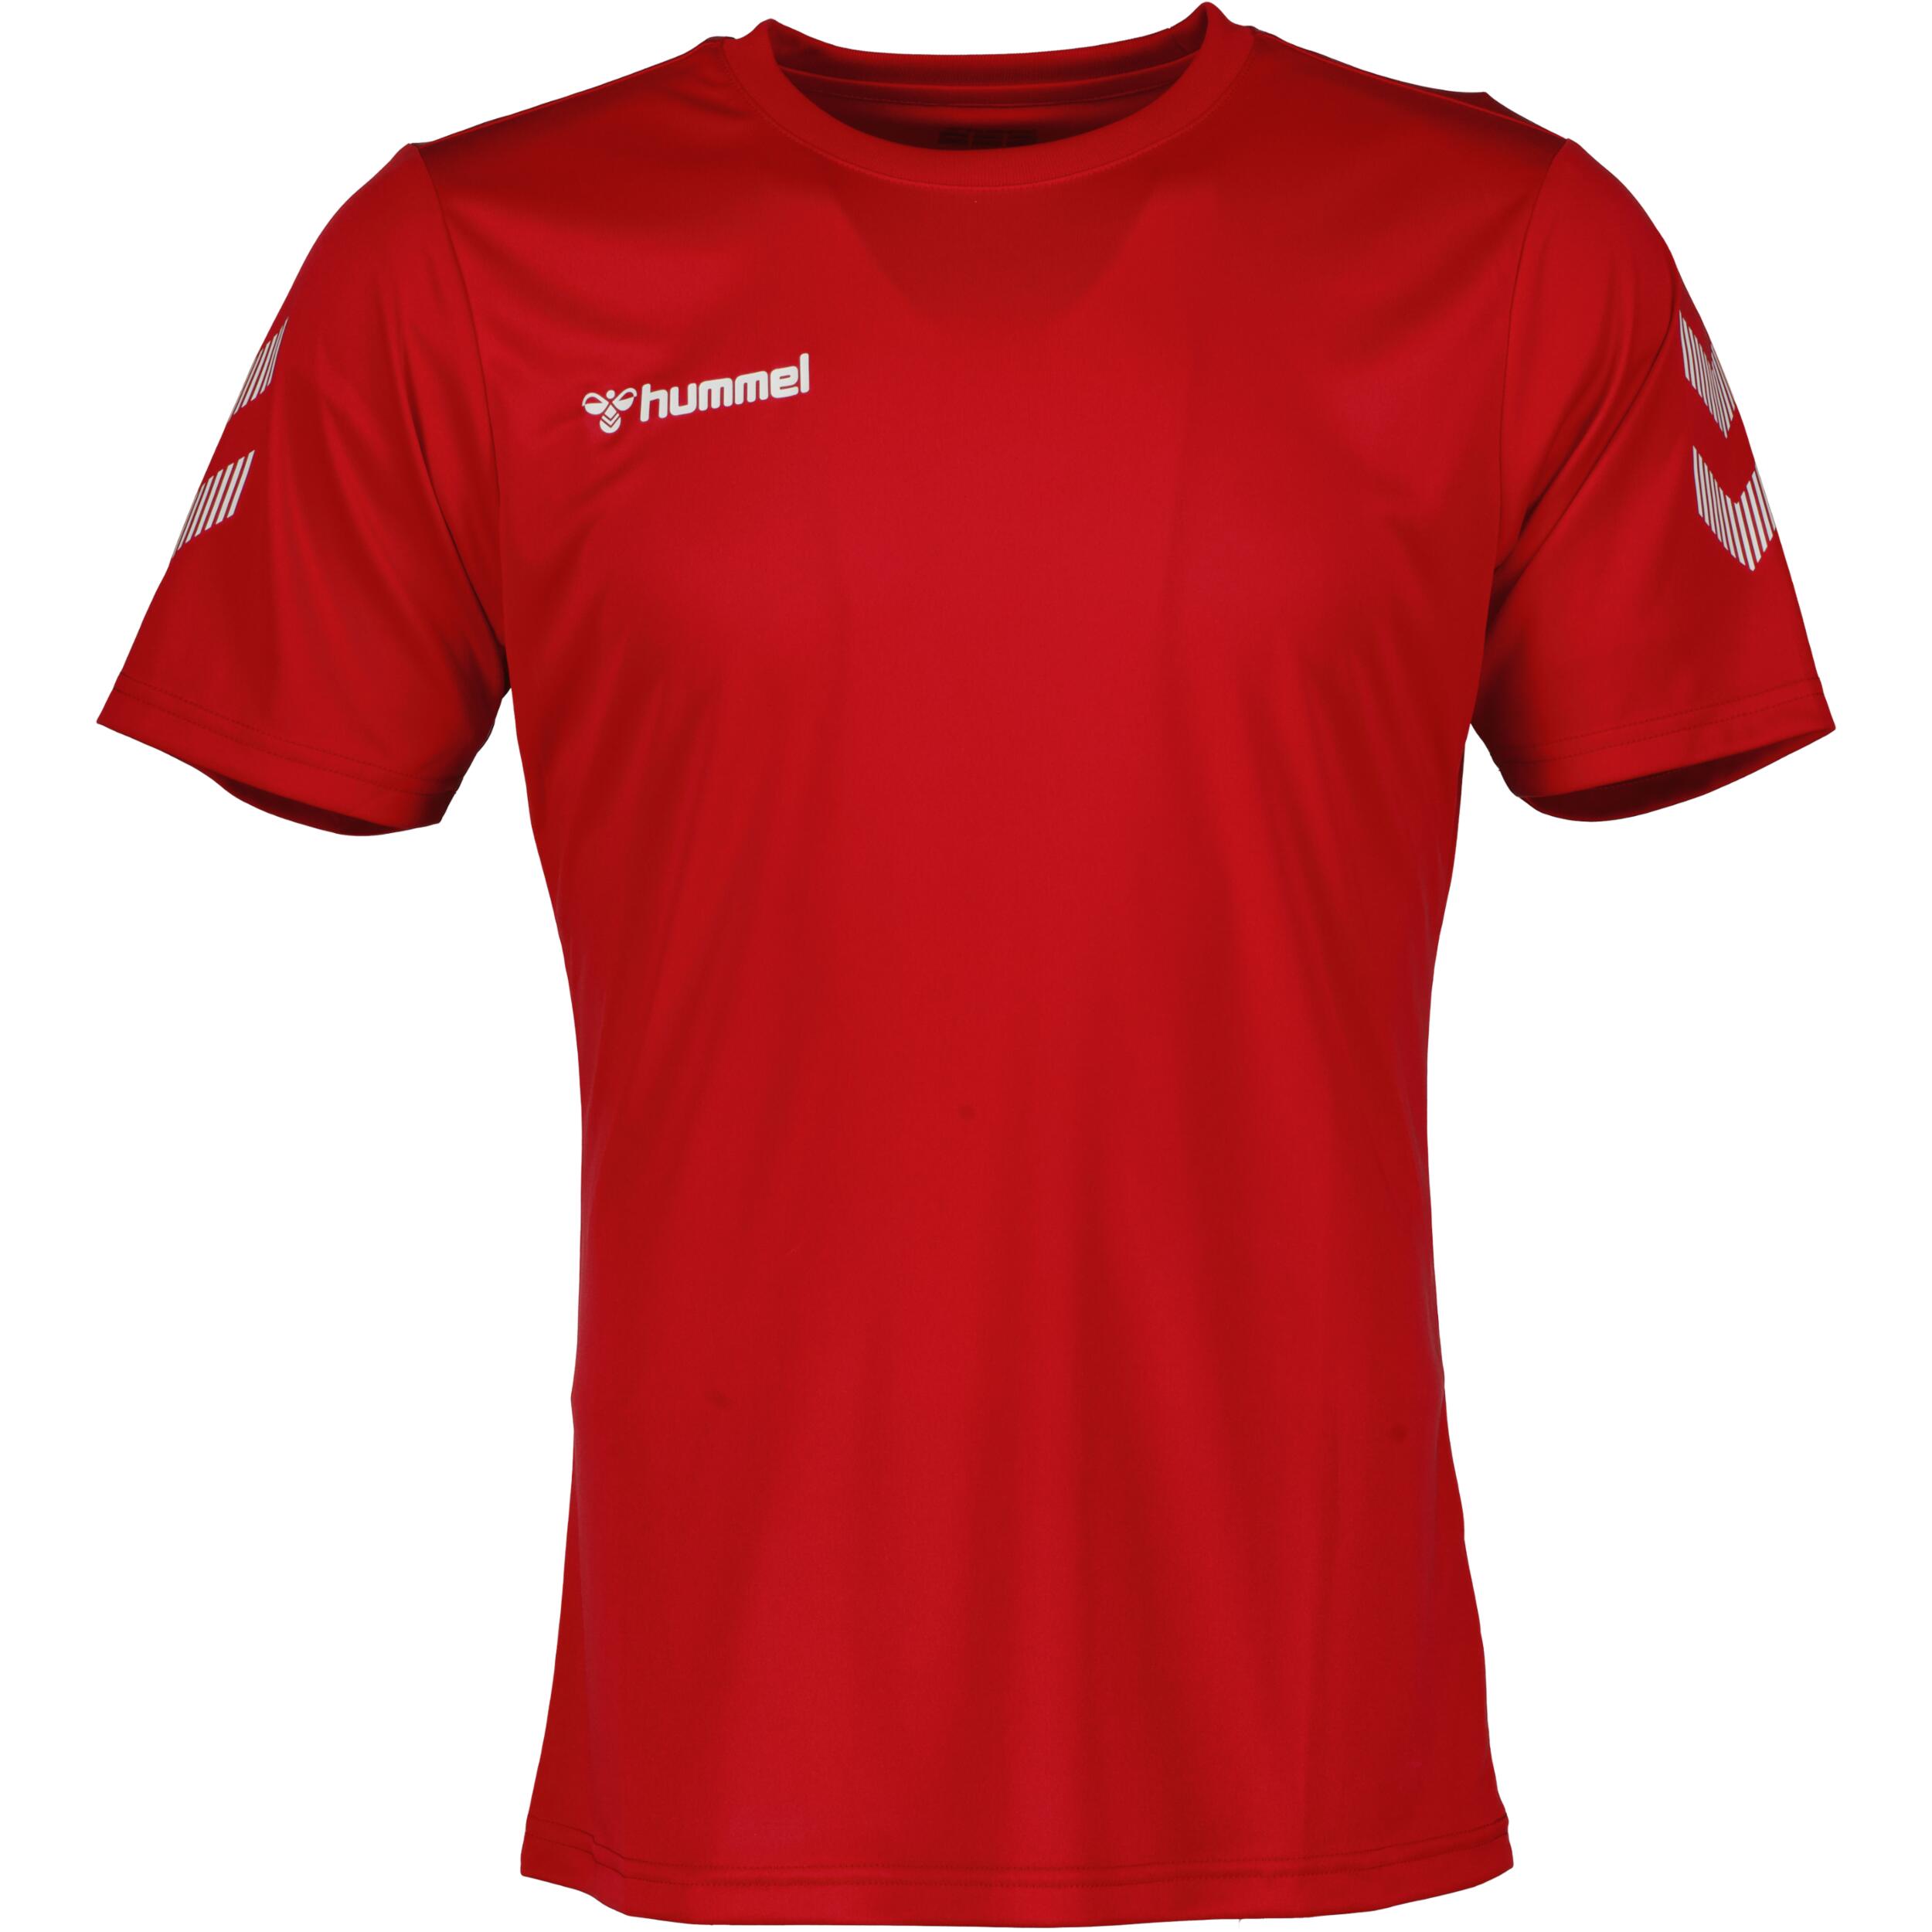 Solo jersey for men, great for football, in true red 1/3